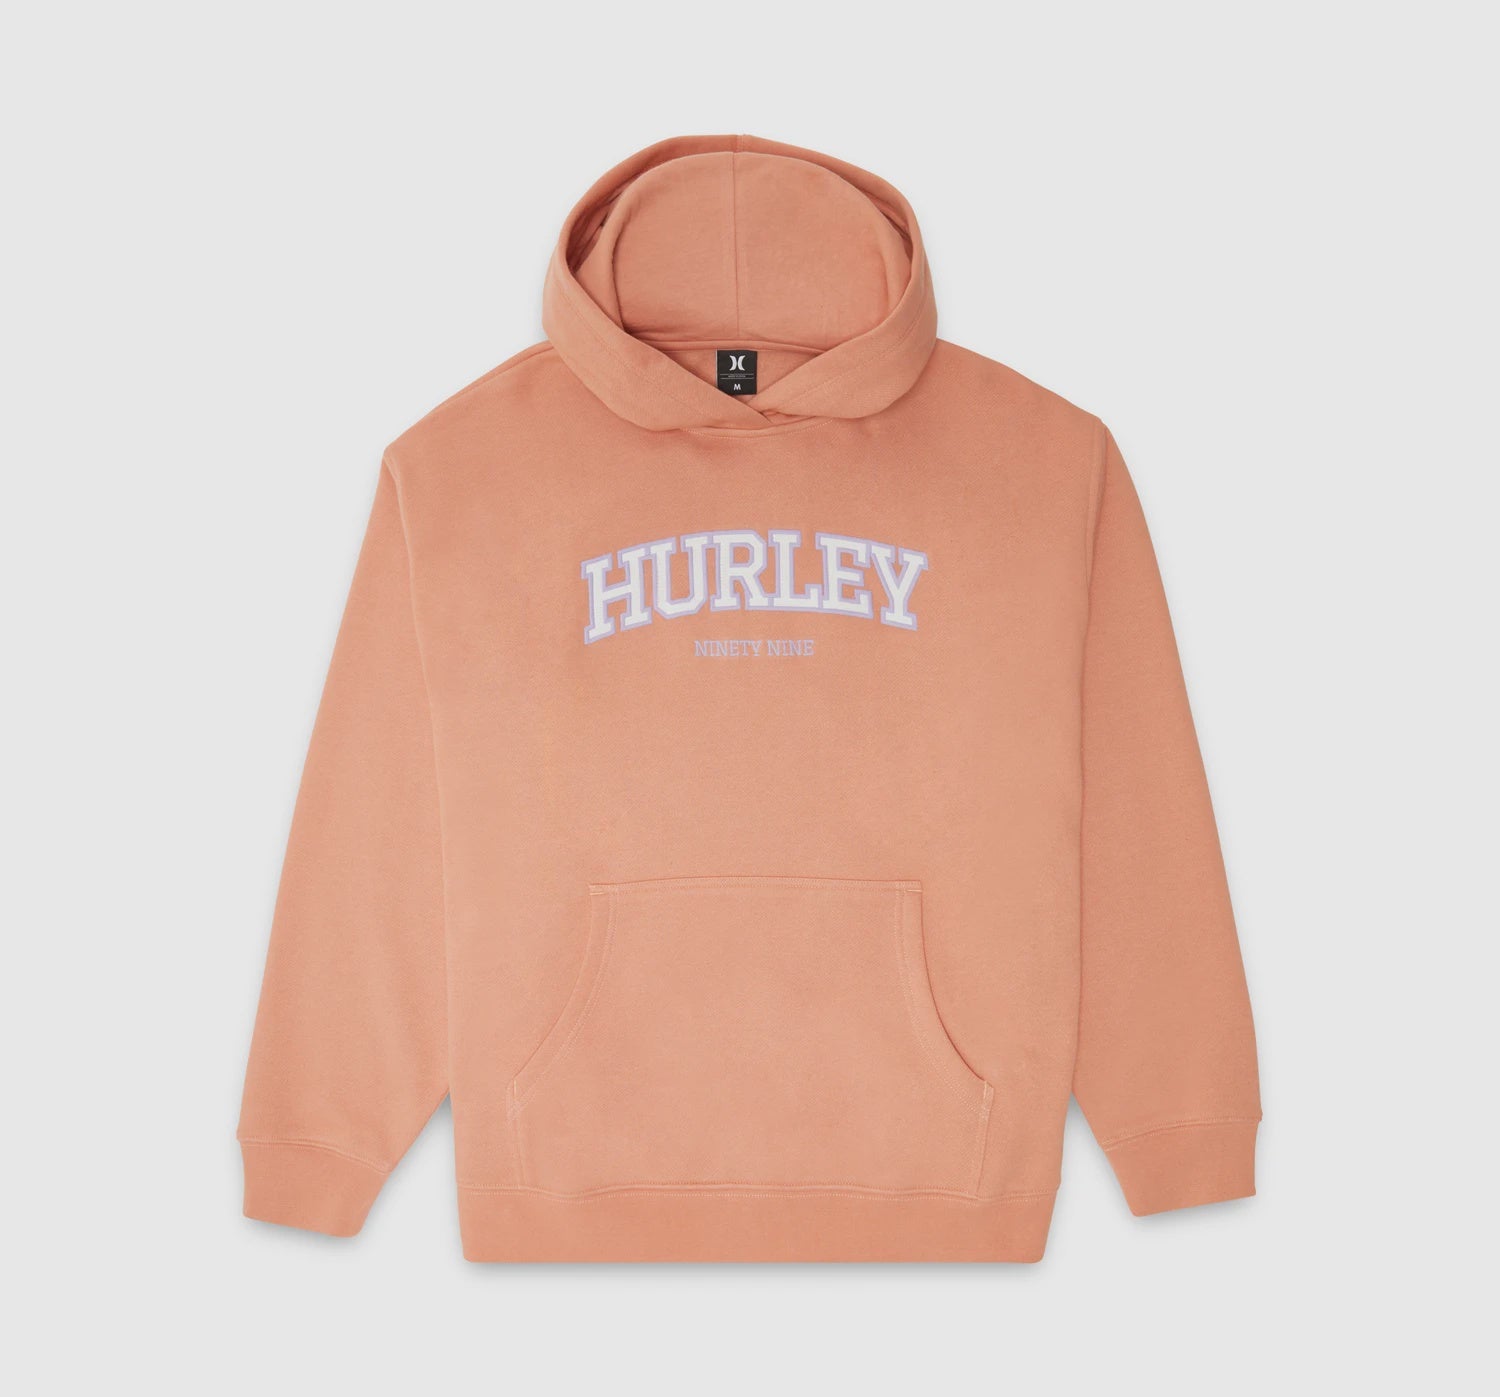 Hygge Hurley Womens Pullover